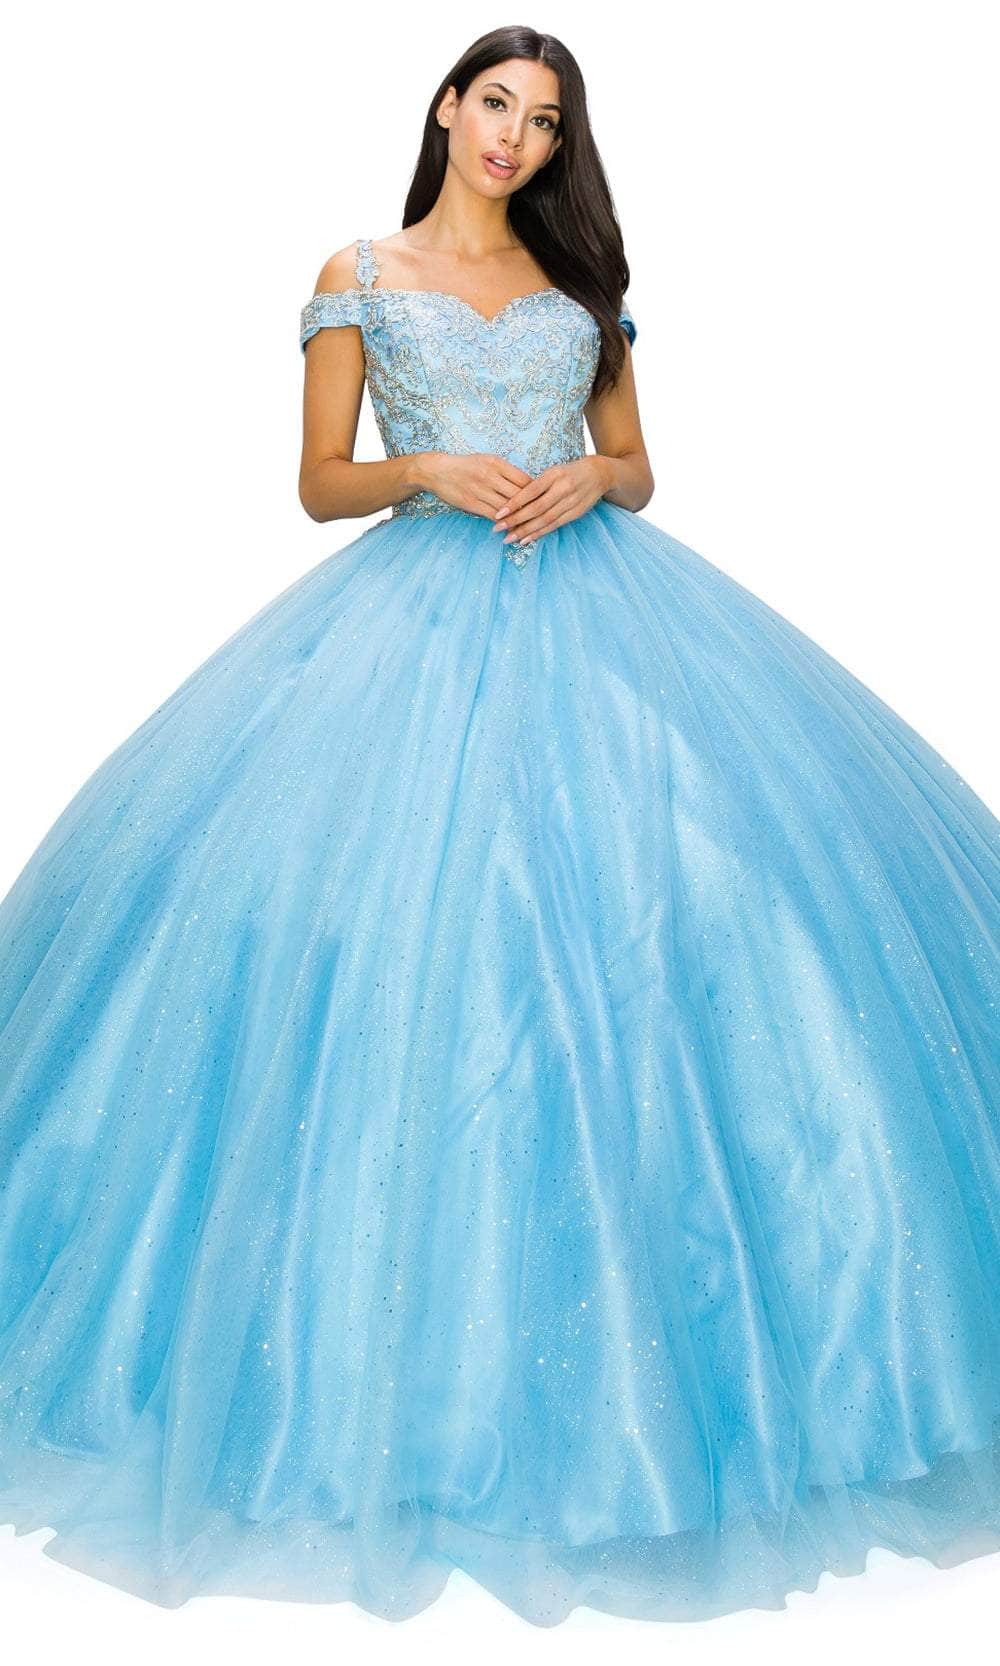 Image of Cinderella Couture 8028J - Sweetheart Cold Shoulder Ballgown